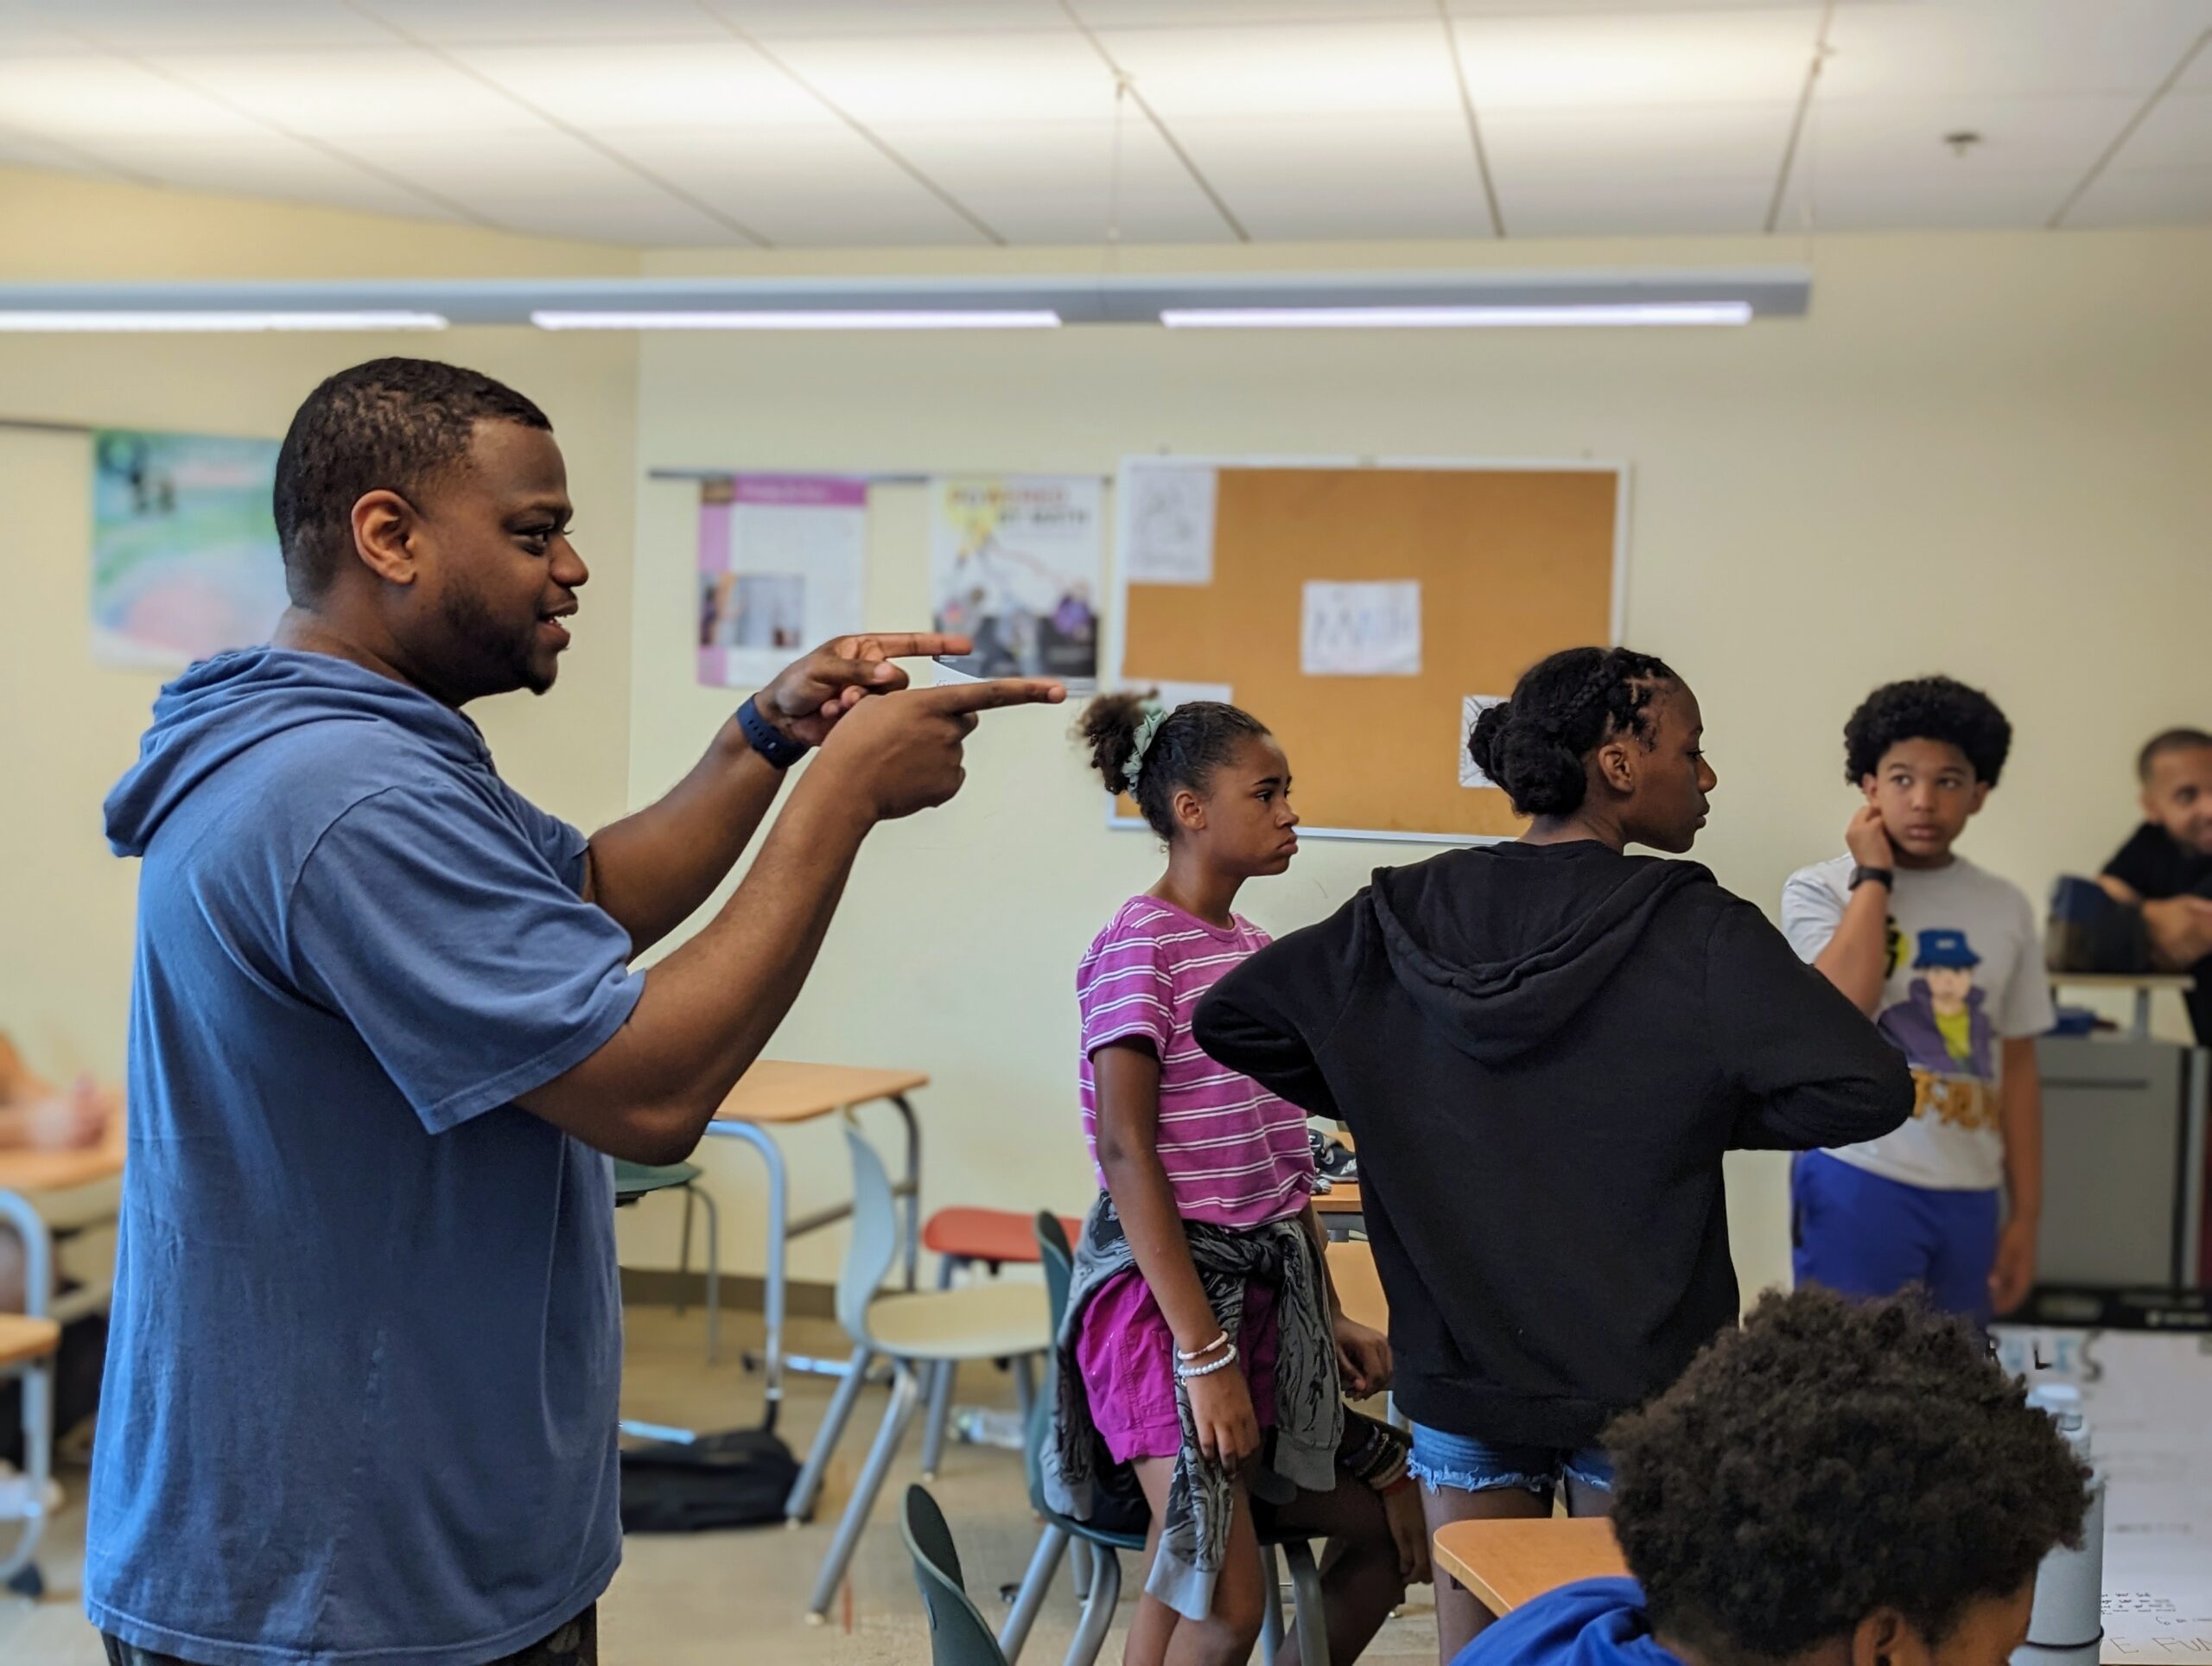 Mr. Davis engaging with a group of students during a class.